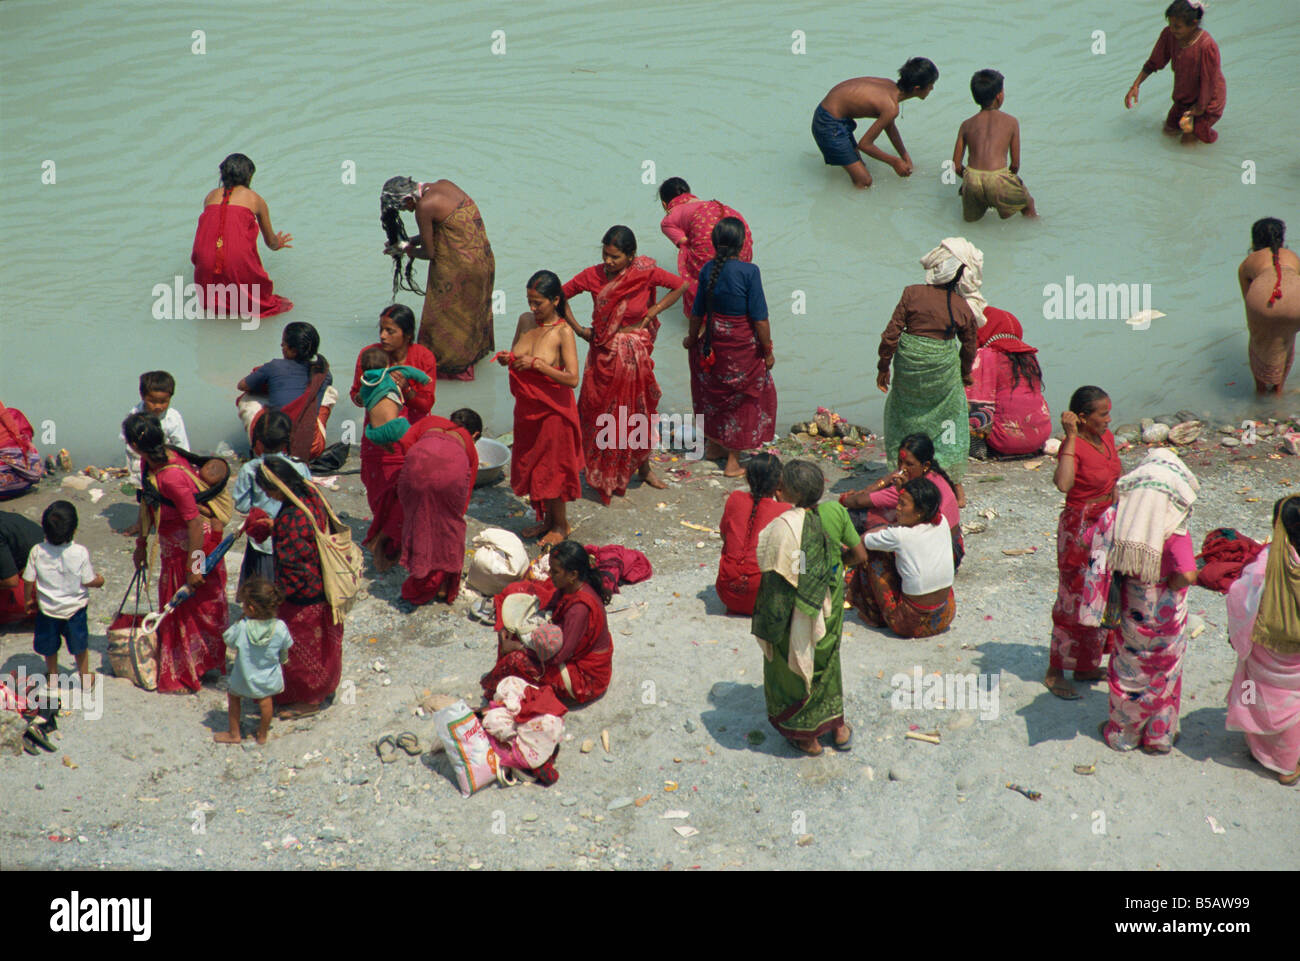 Ritual cleansing in Seti Khola a tributary of the Ganges for Nepali New Year Pokhara Nepa Asia Stock Photo